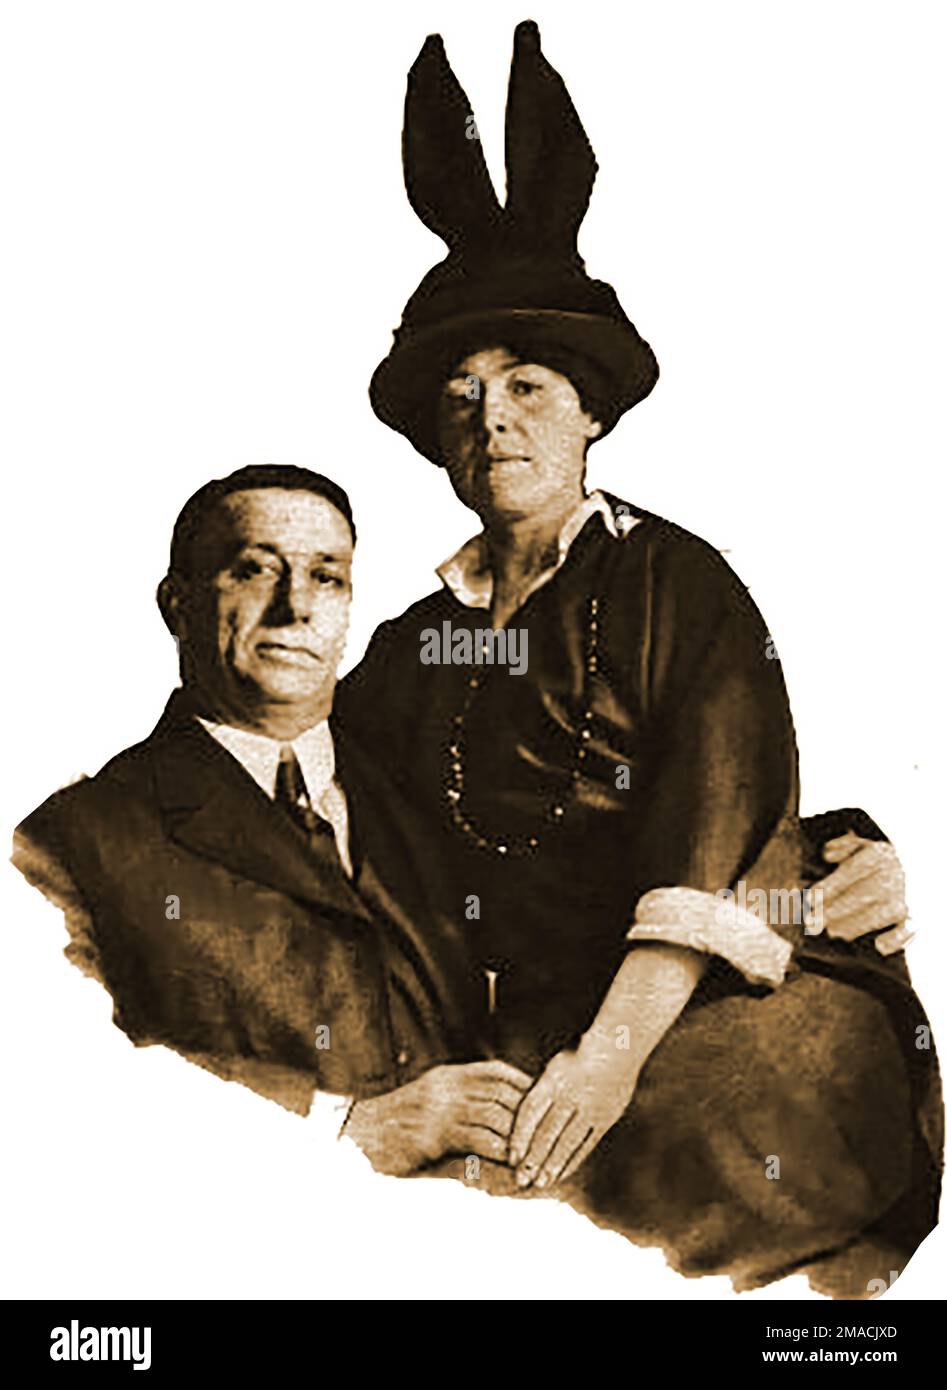 Portrait of Mr Charles & Mrs Letitia  Becker at the time of the U.S. Becker trial, Charles Becker ( 1870 – July 30, 1915) was a lieutenant in the New York City Police Department when he was   executed for the first-degree murder of the Manhattan gambler Herman Rosenthal in 1912 , Becker himself was allegedly making deals with the criminal fraternity and  had organised four men to kill Rosenthal who had  made press allegations about the illegal deals done by Becker. Becker's death in the electric chair took 9 minutes and was described as the clumsiest execution in the history of 'Sing Sing' Stock Photo